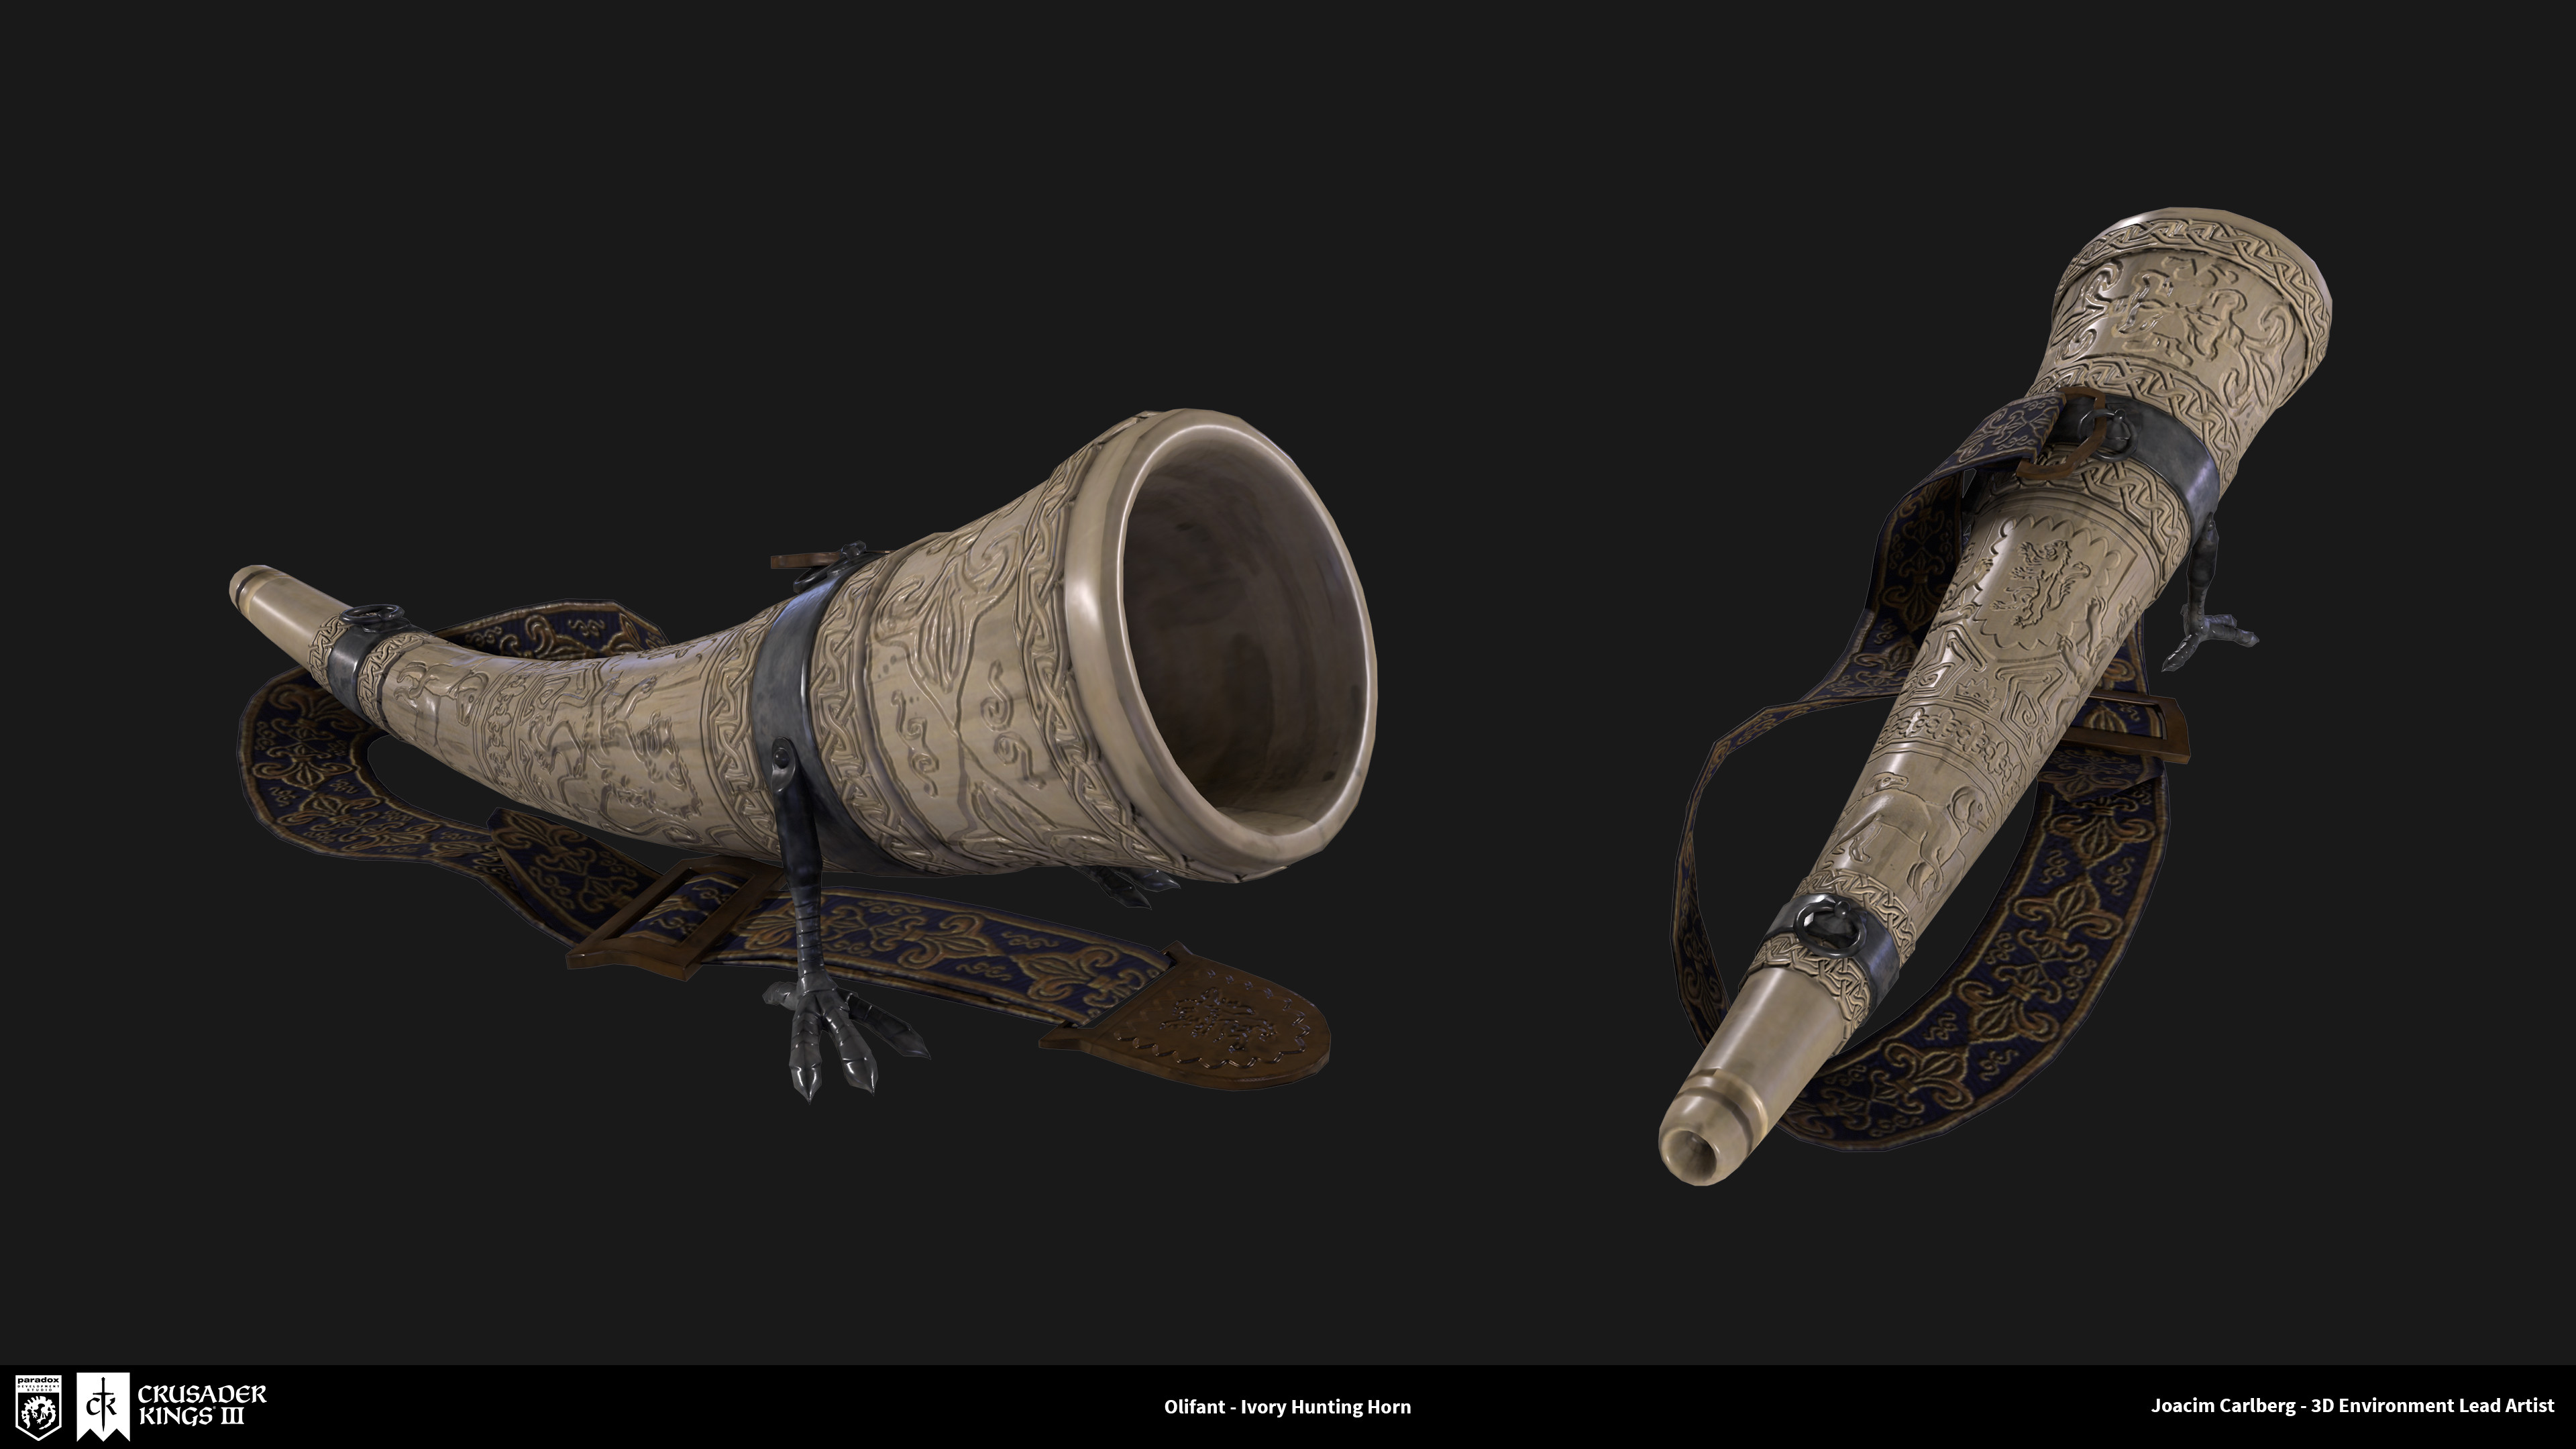 An Olifant, or ivory hunting horn based upon historical references.